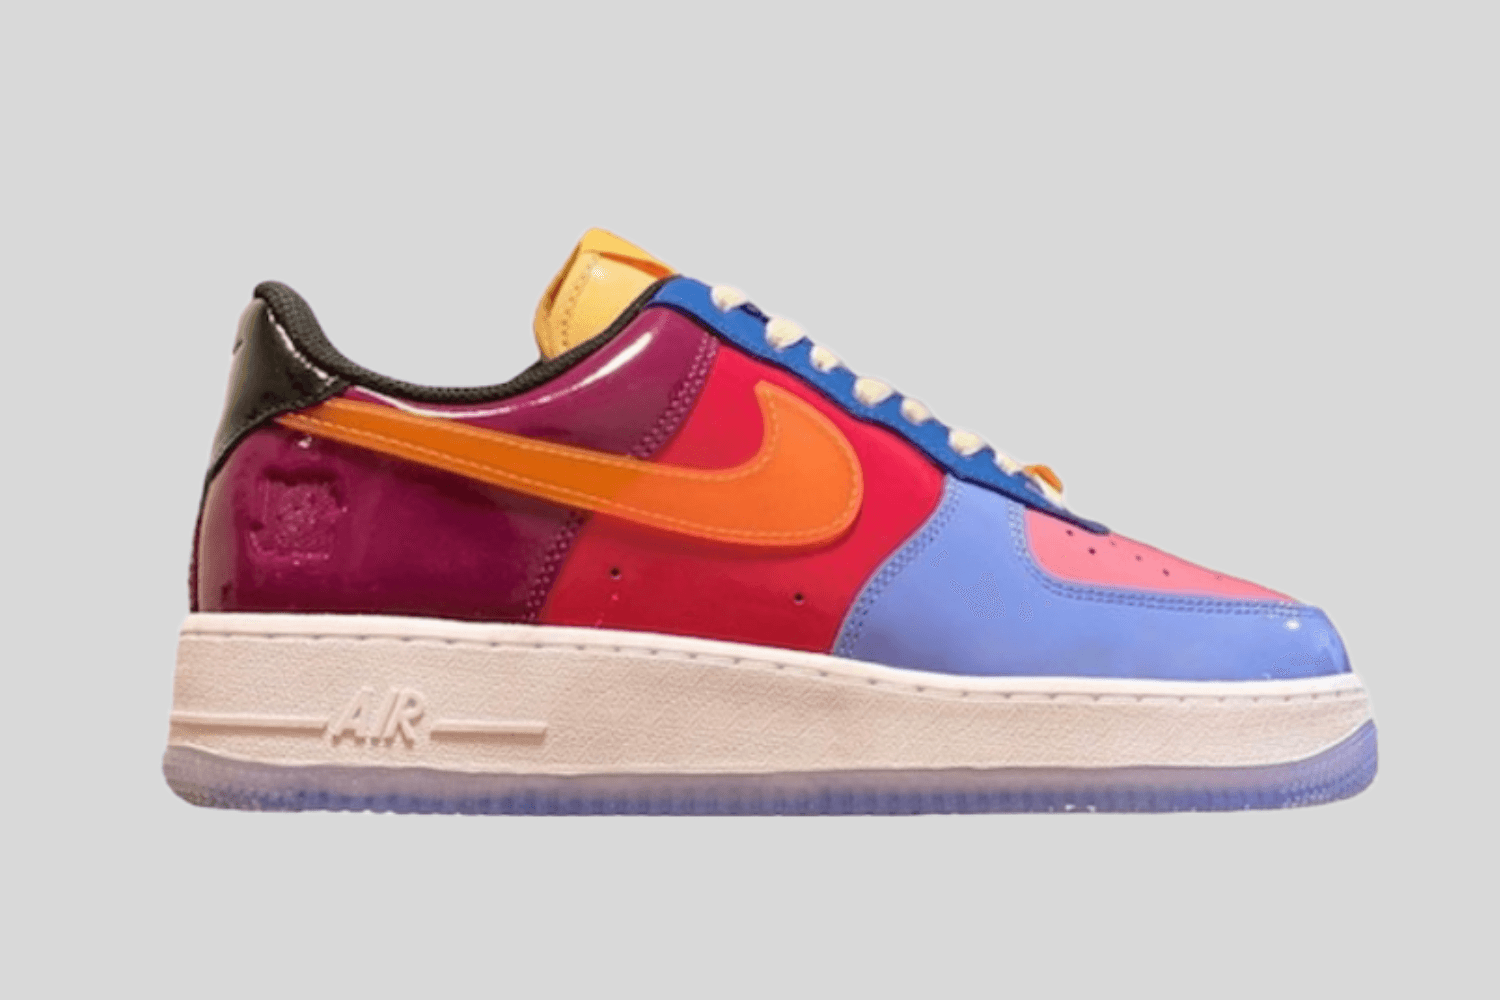 Take a look at the Nike X UNDEFEATED Air Force 1 Low Multi-Patent